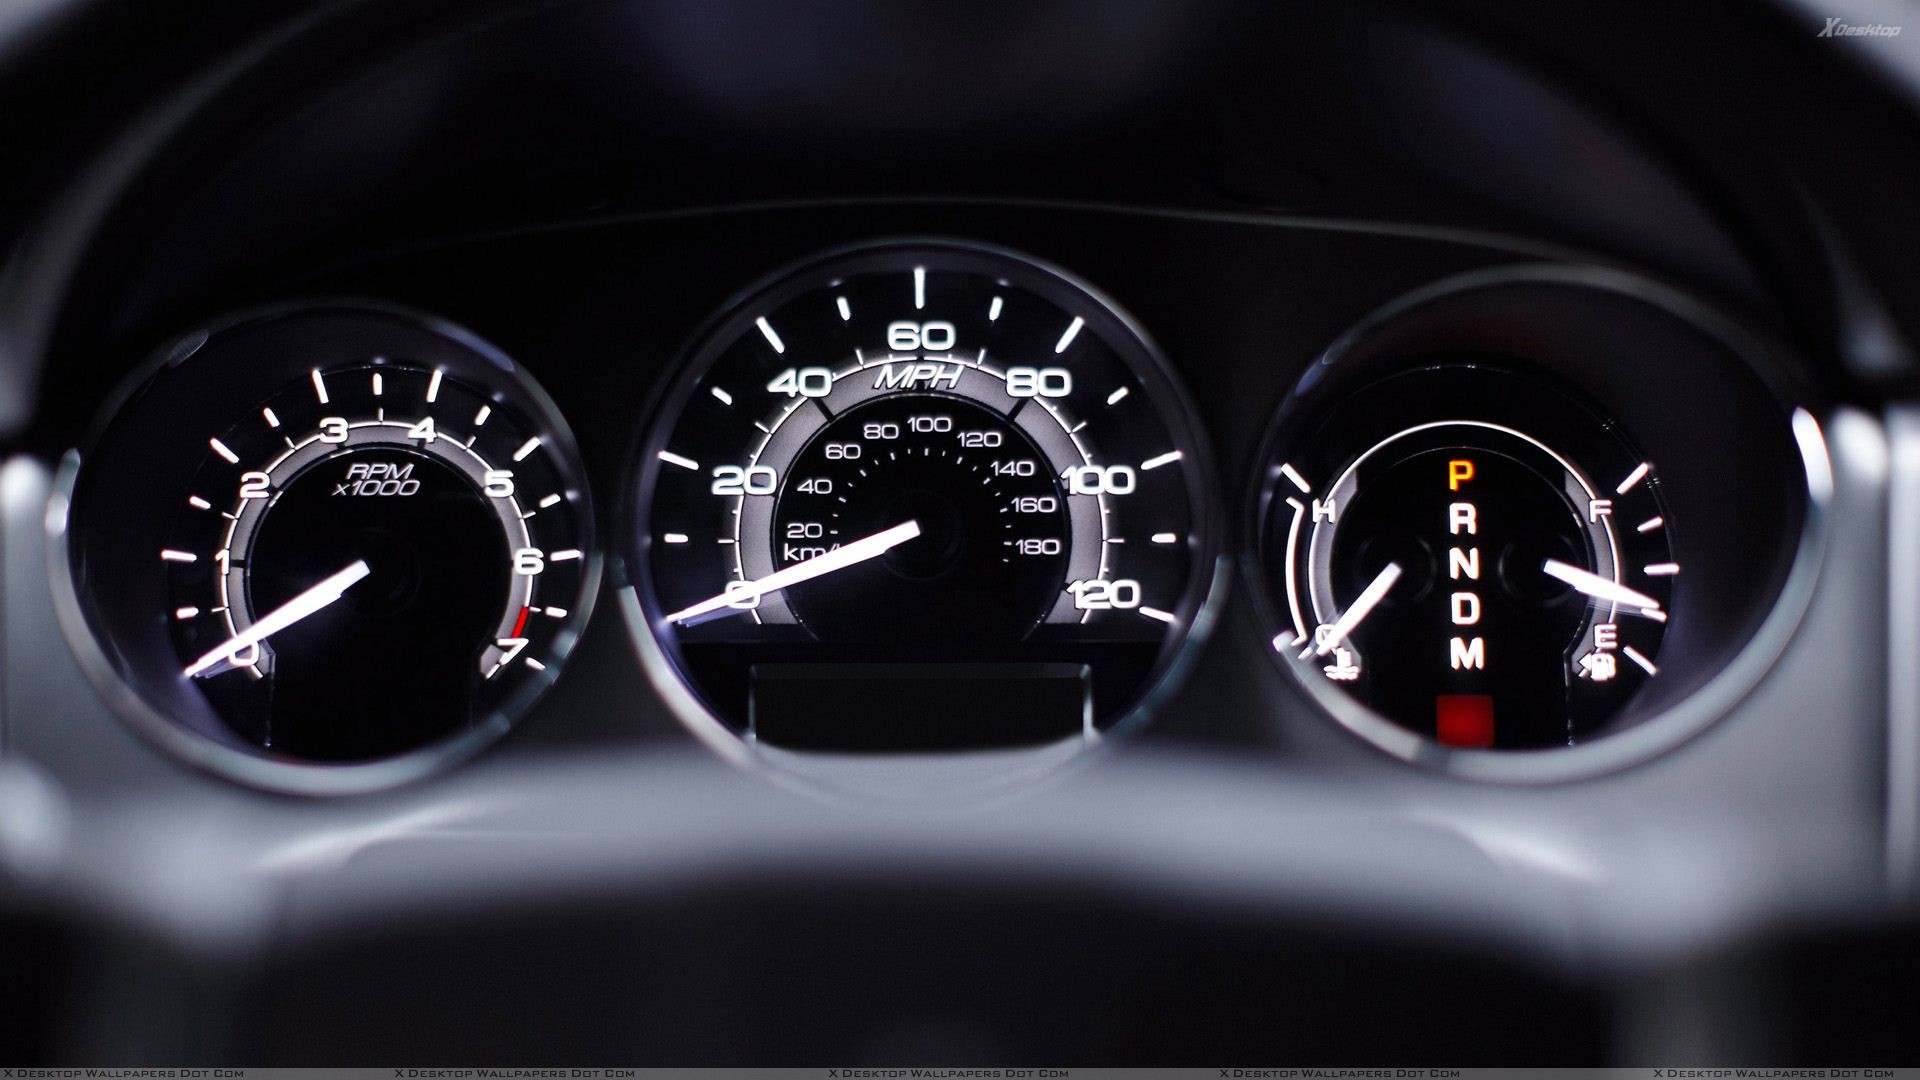 1920x1080 You are viewing wallpaper titled "Speedometer ...